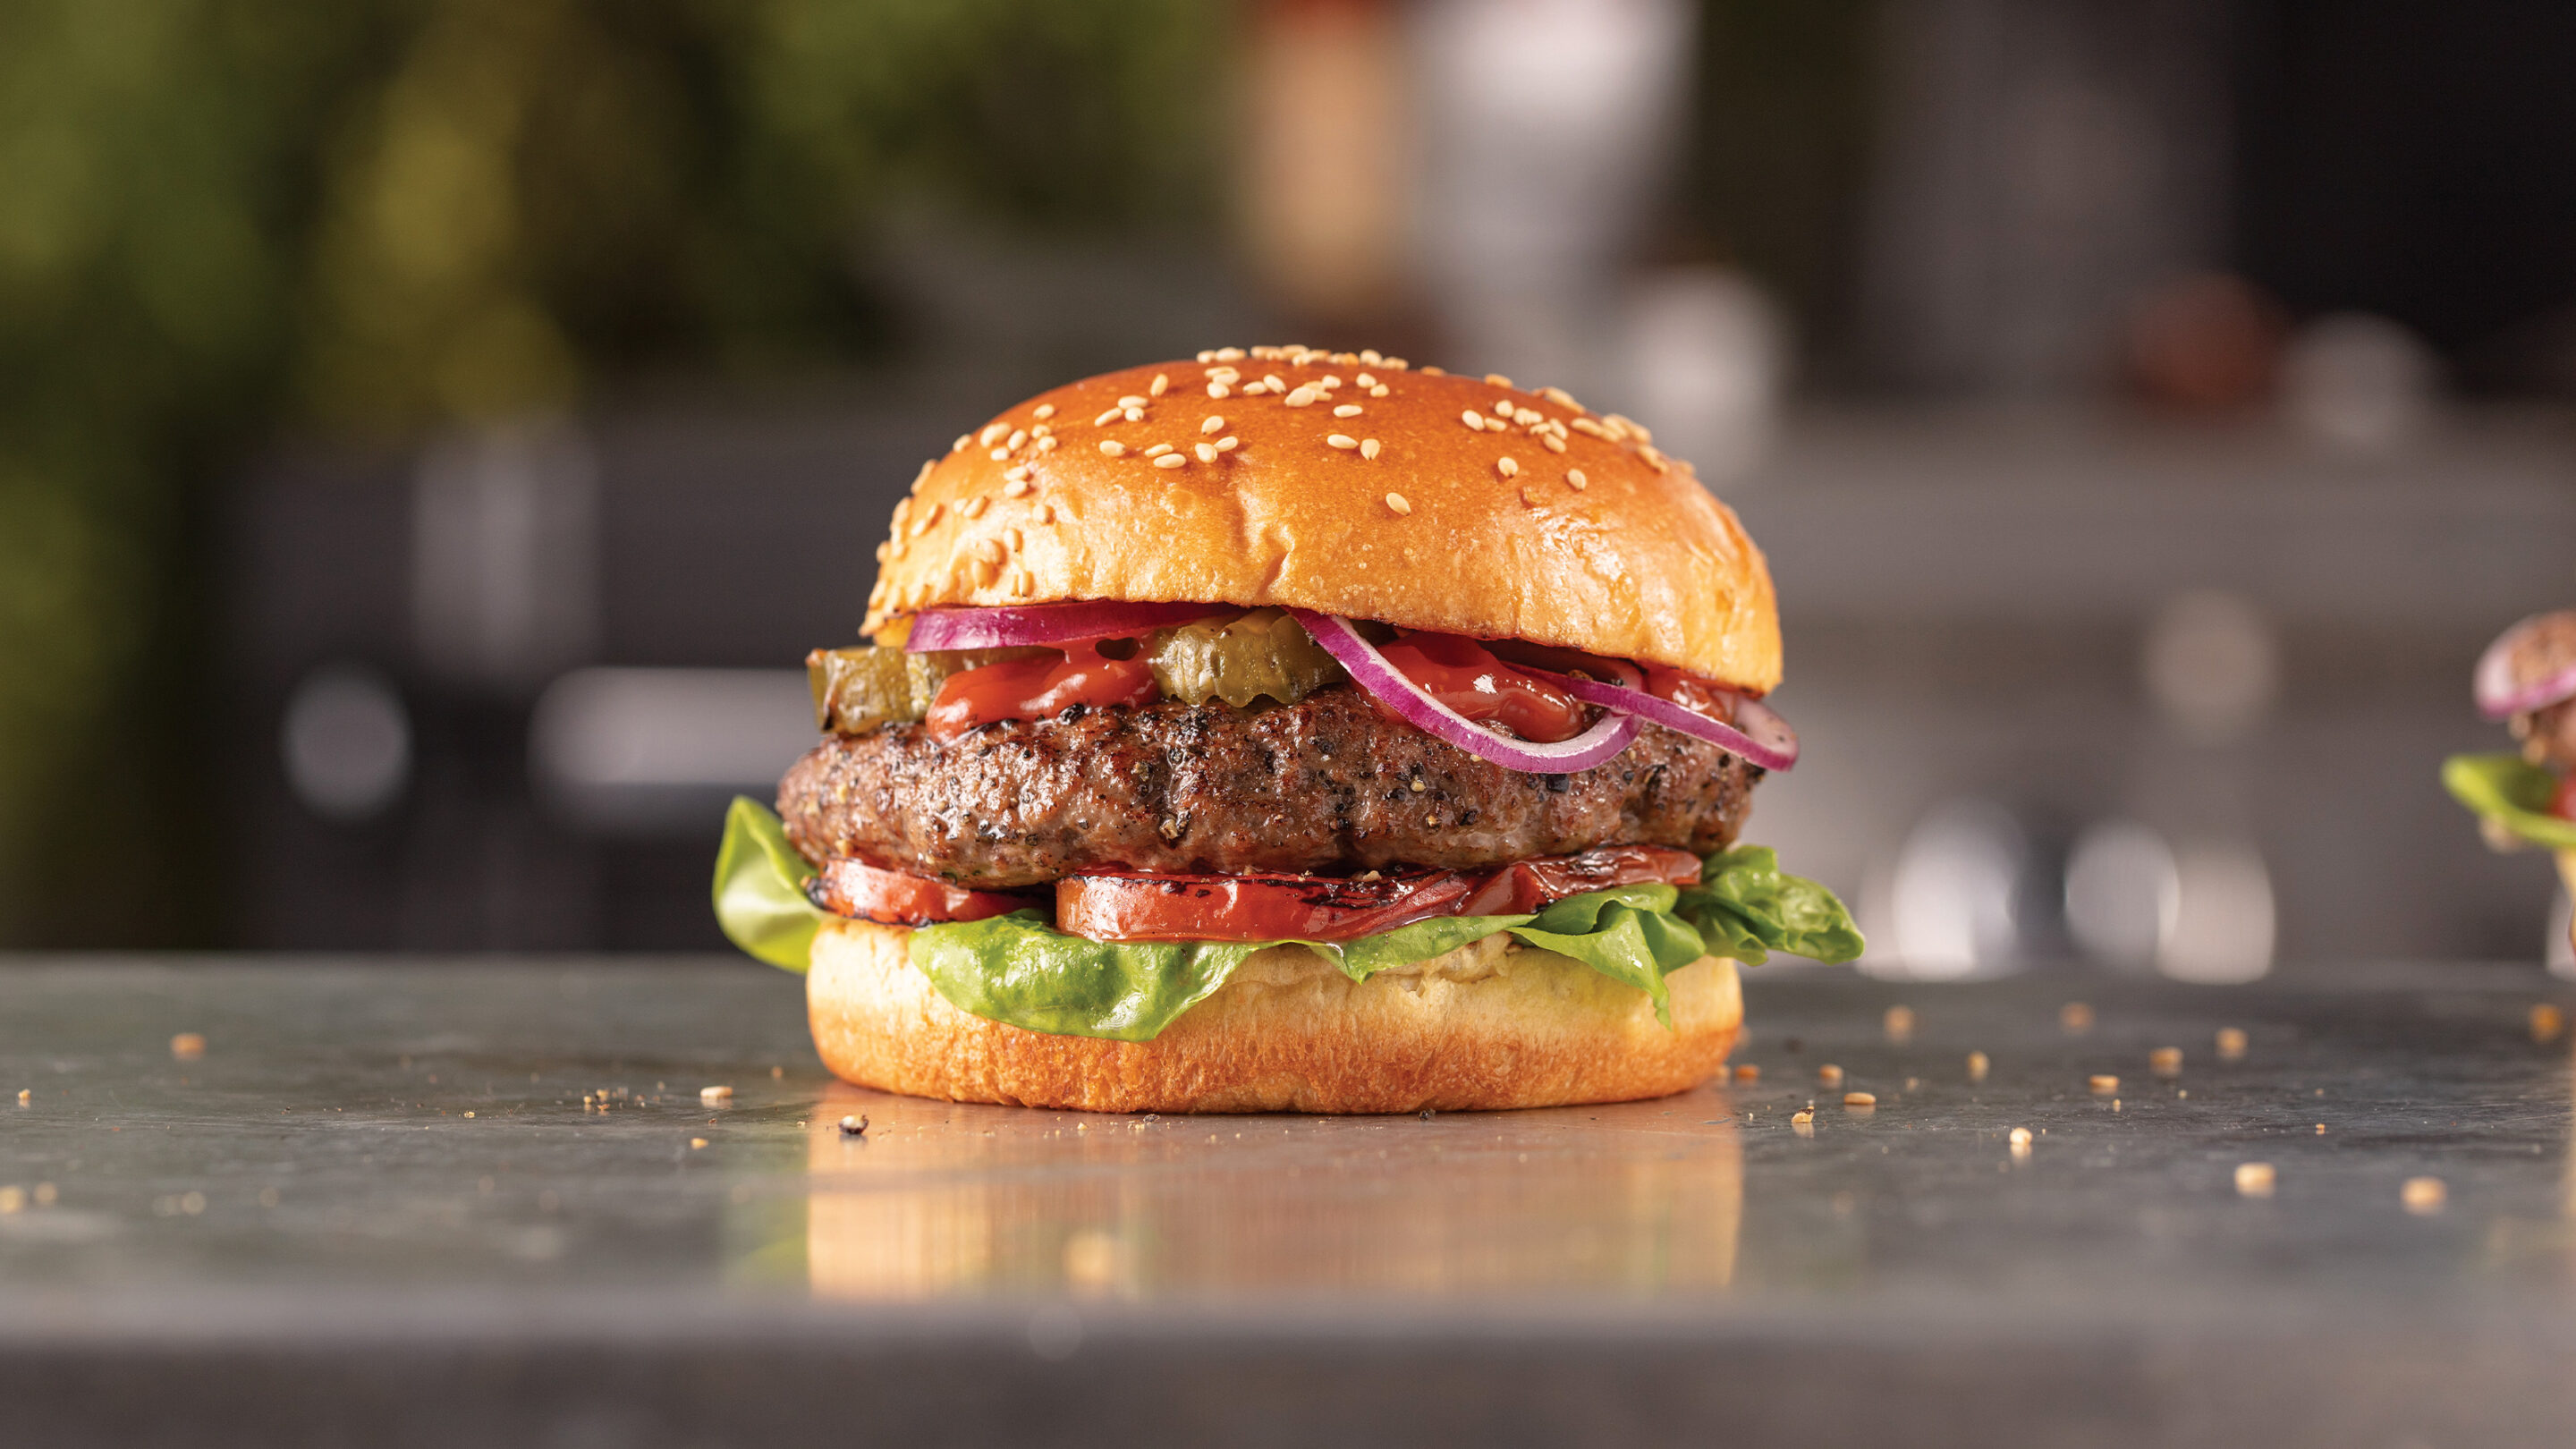 https://blog-content.omahasteaks.com/wp-content/uploads/2022/06/blogwp_how-to-grill-the-perfect-burger-scaled-1.jpg